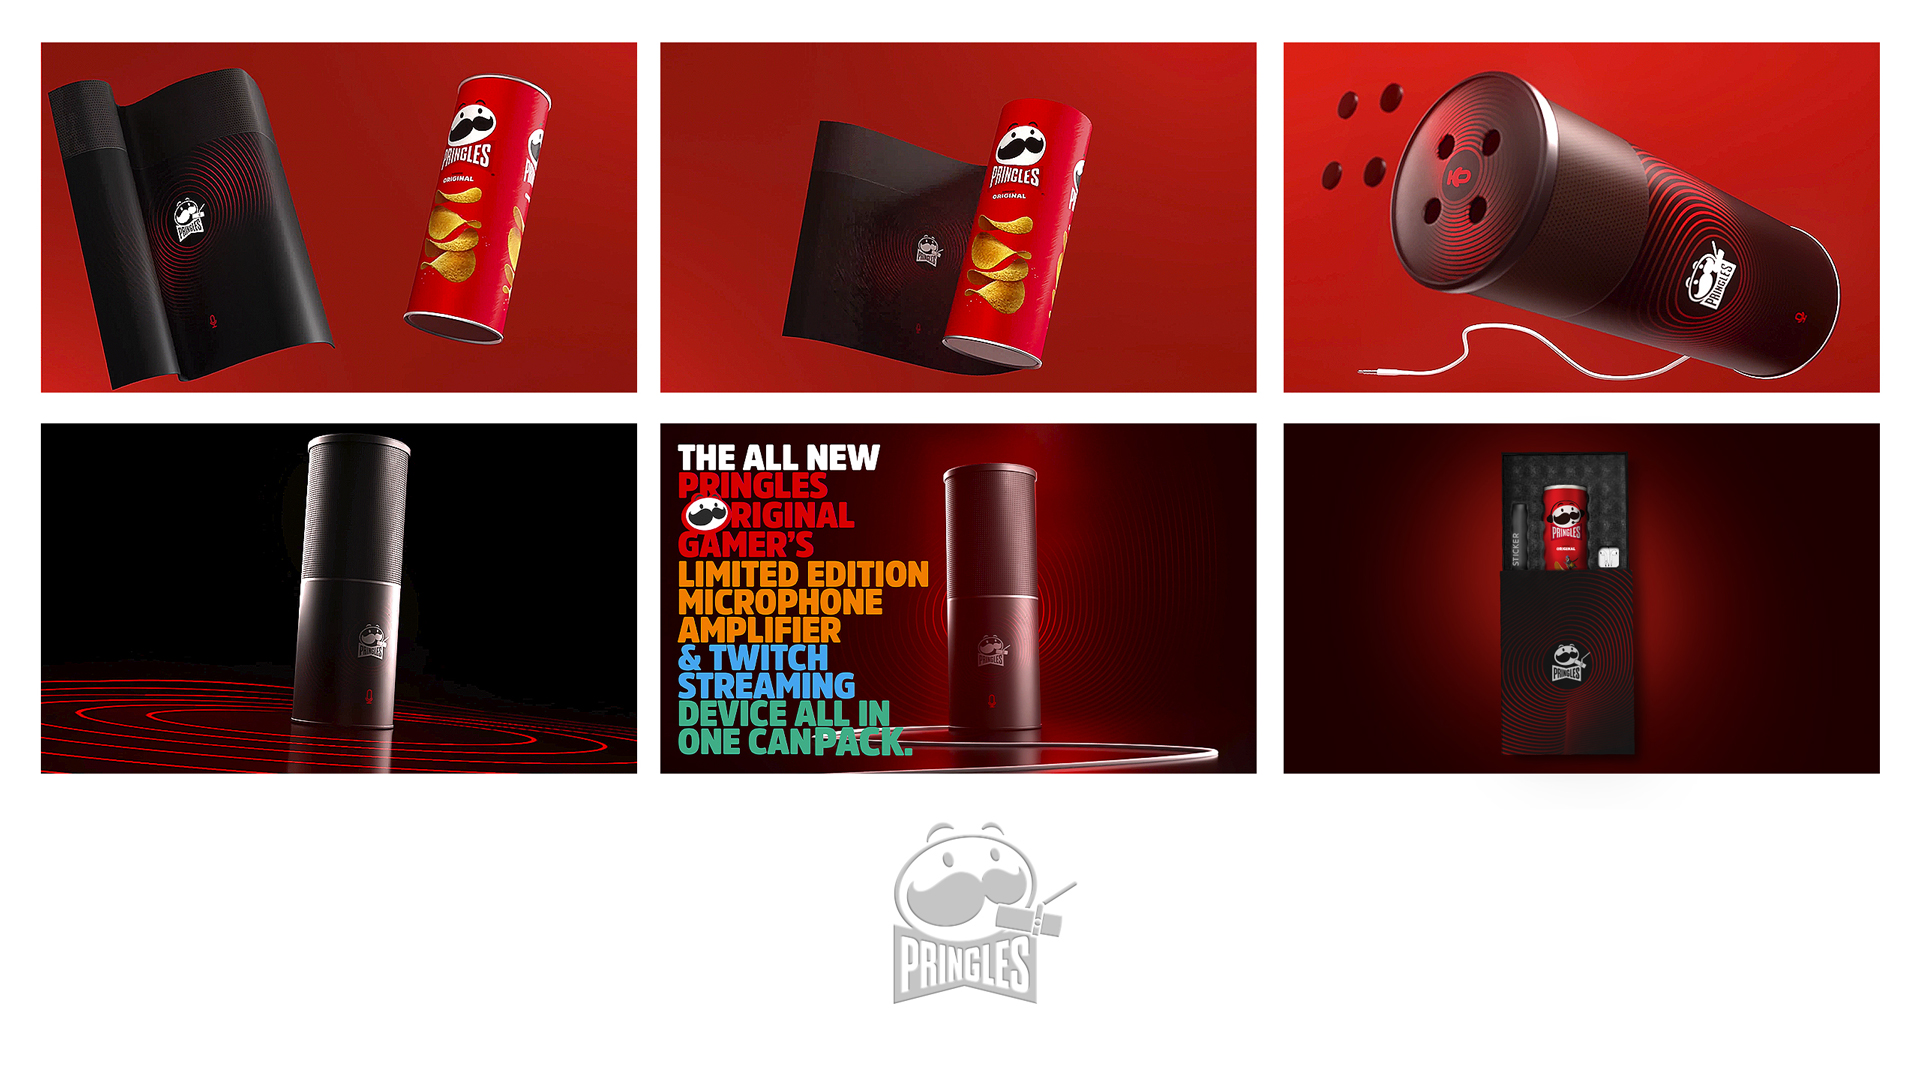 Pringles Limited Edition Microphone Amplifier & Streaming Device All-In-One Can Pack